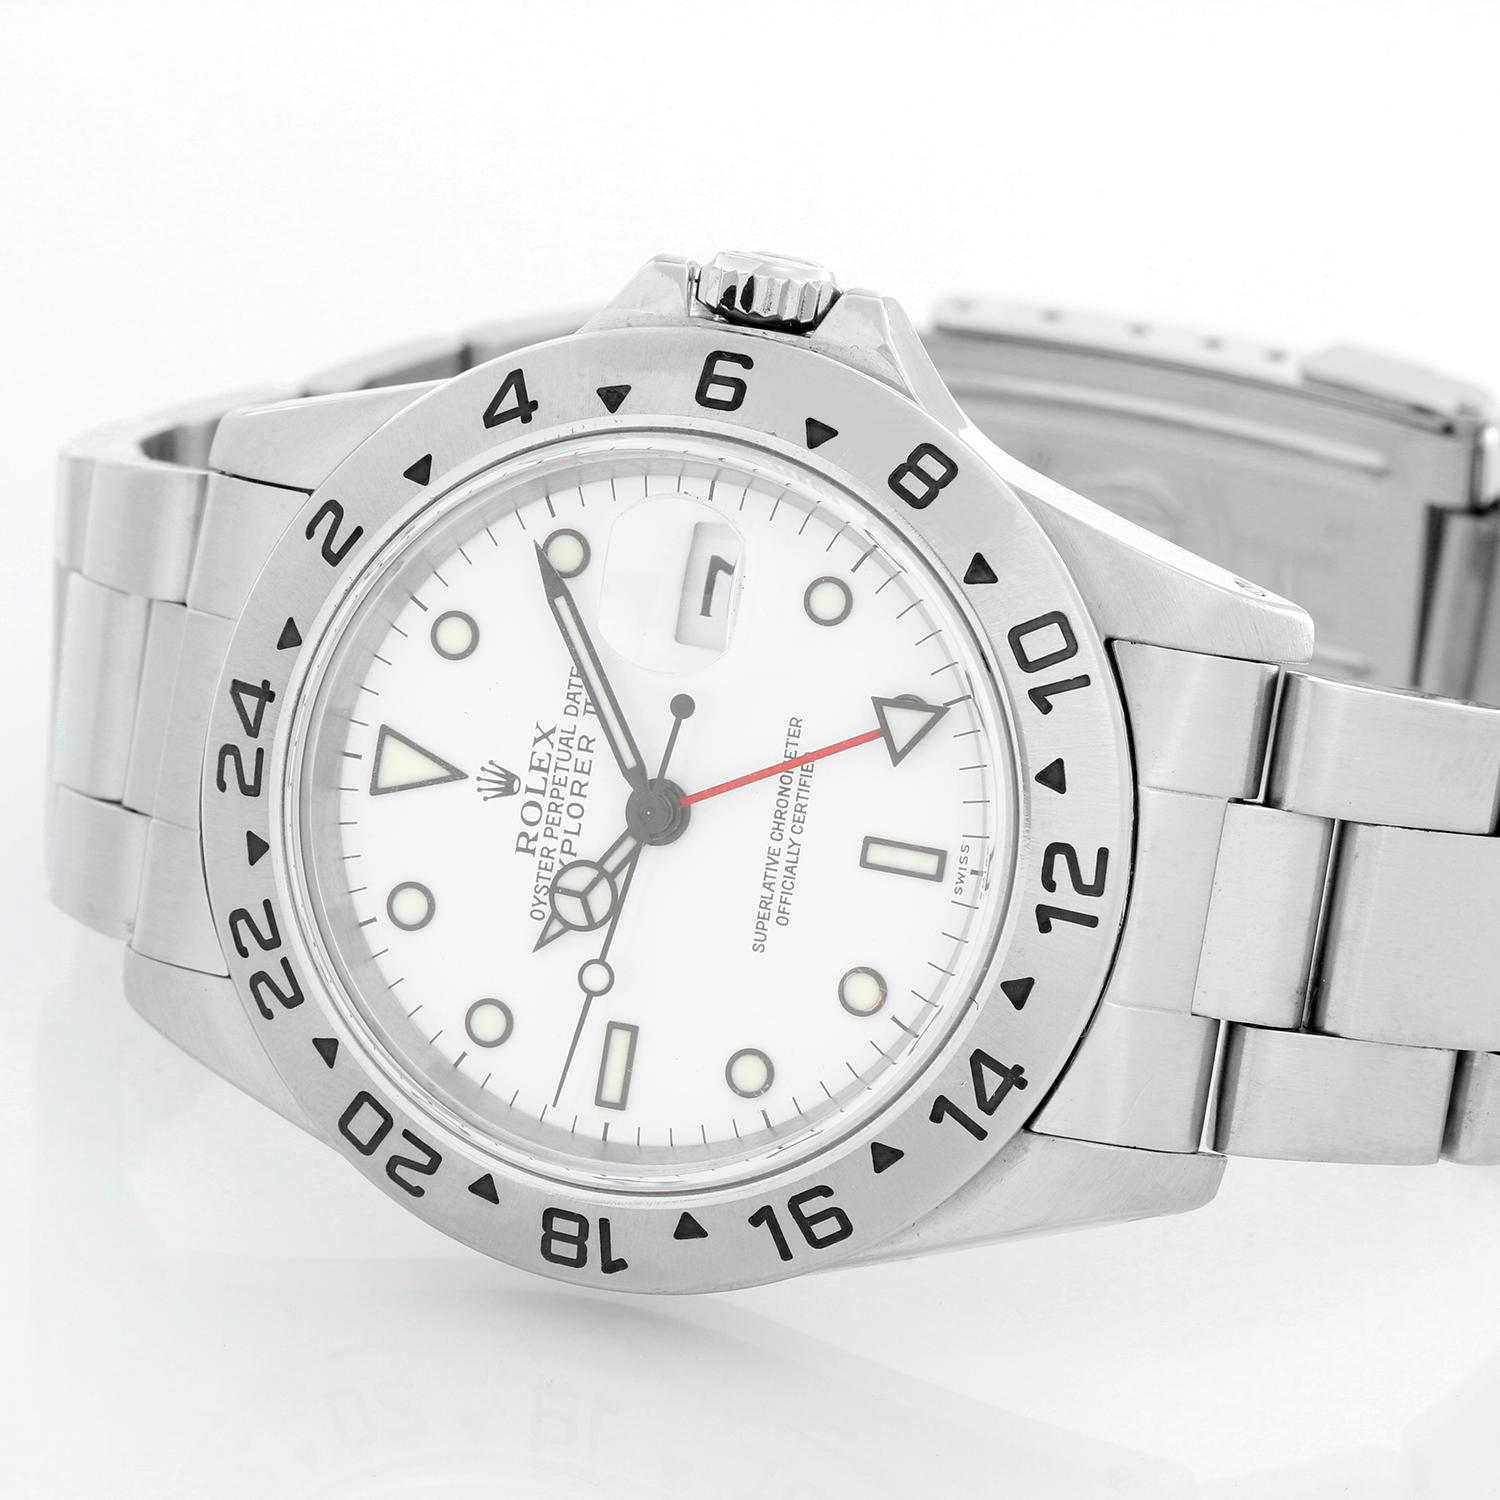 Rolex Explorer II  Men's Stainless Steel Watch 16570 - Automatic winding, 31 jewels, Quickset, sapphire crystal, dual time. Stainless steel case (42mm diameter). White dial with luminous markers. Stainless steel Oyster bracelet with folding buckle.